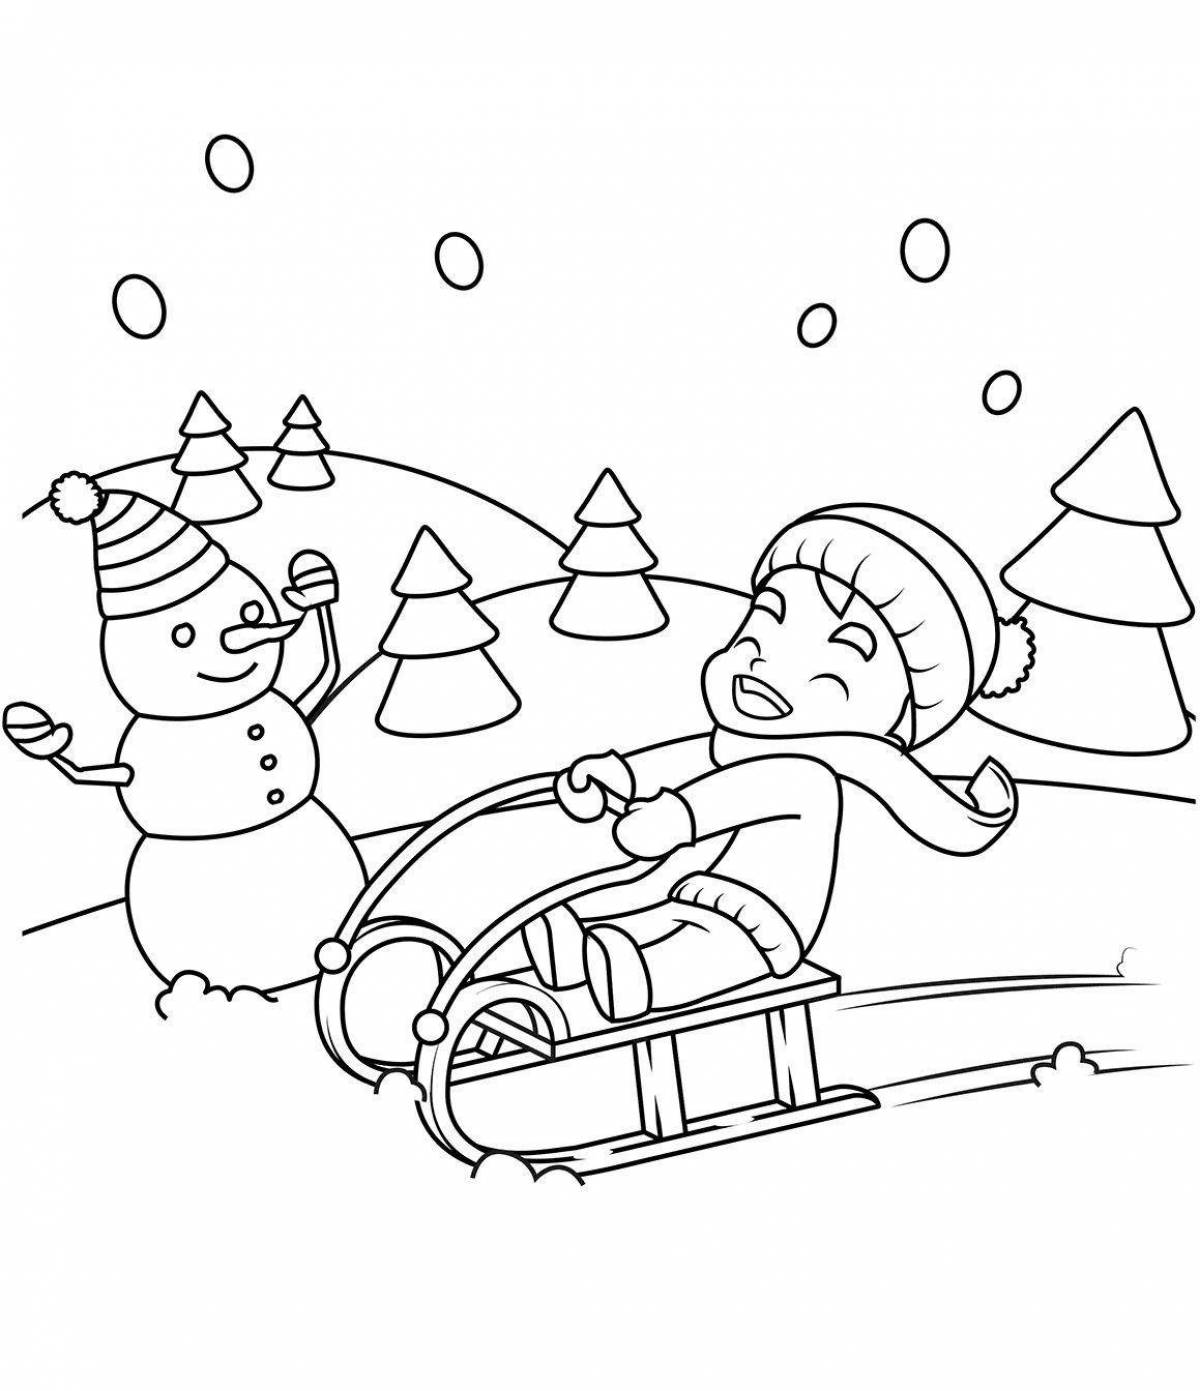 Exquisite winter holidays coloring book for kids